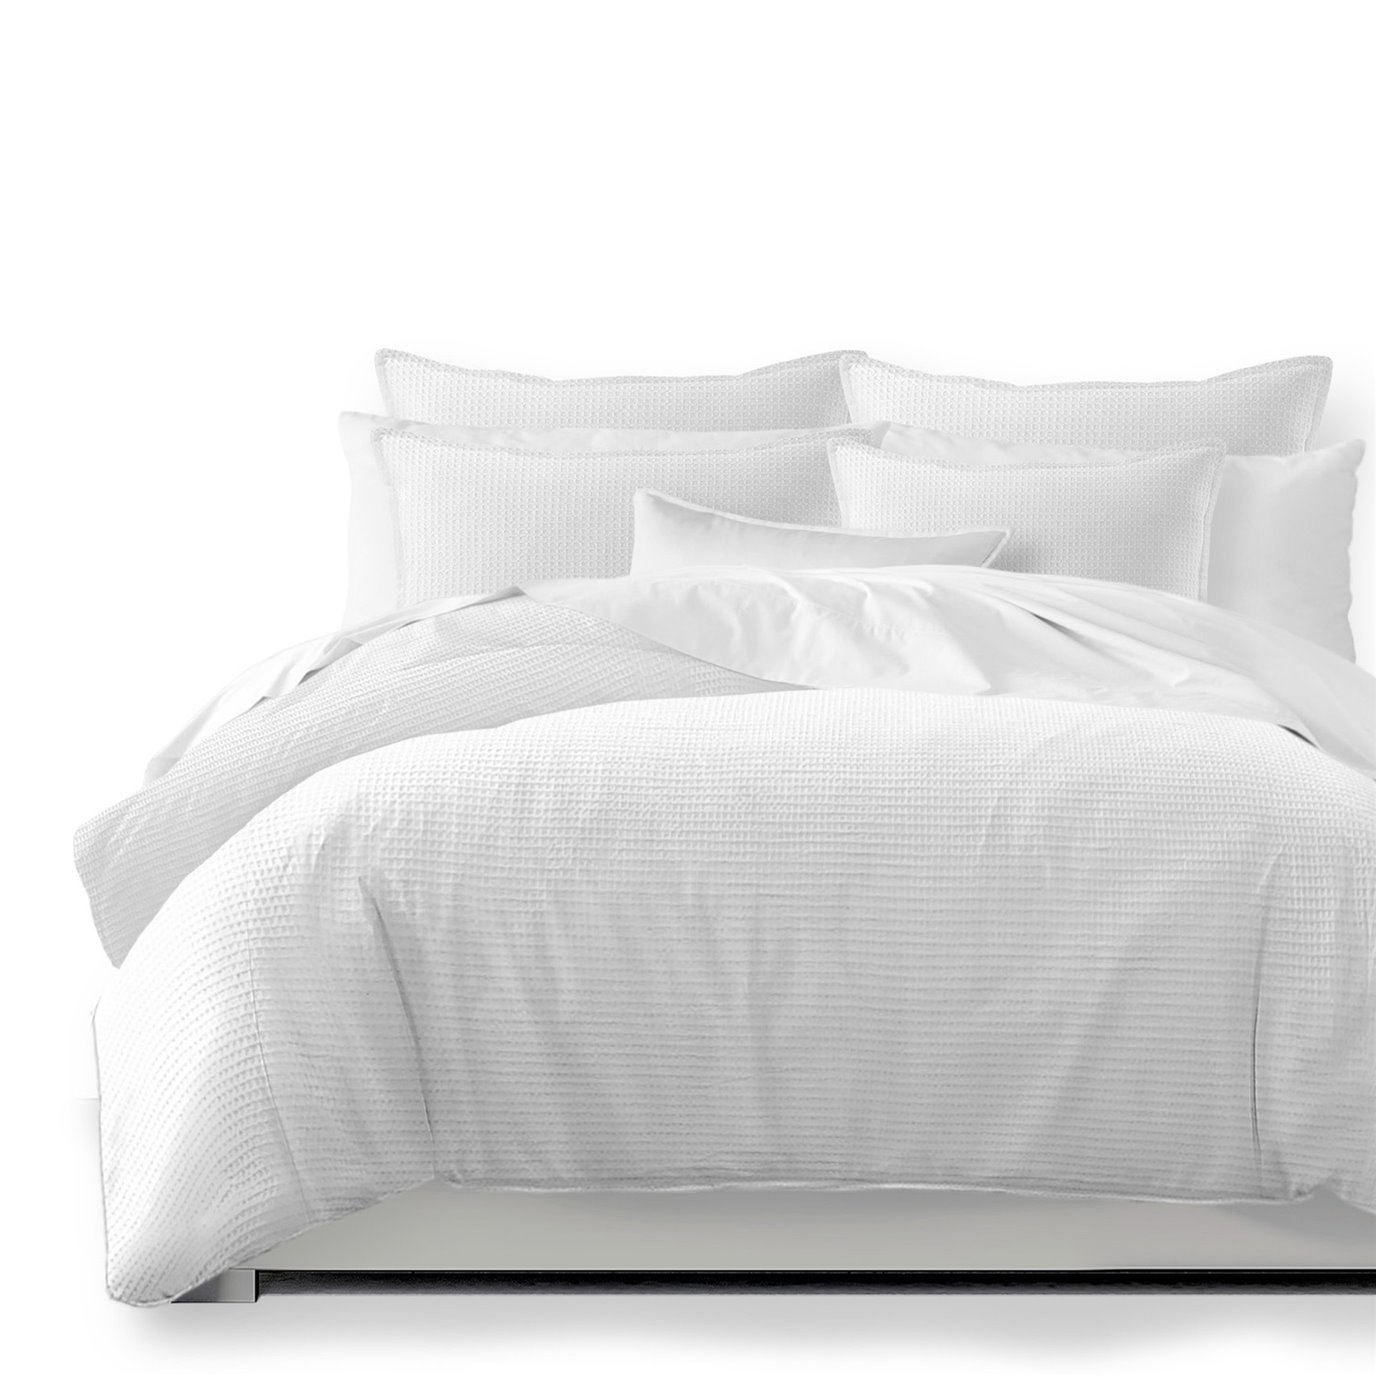 Classic Waffle White Duvet Cover and Pillow Sham(s) Set - Size Full